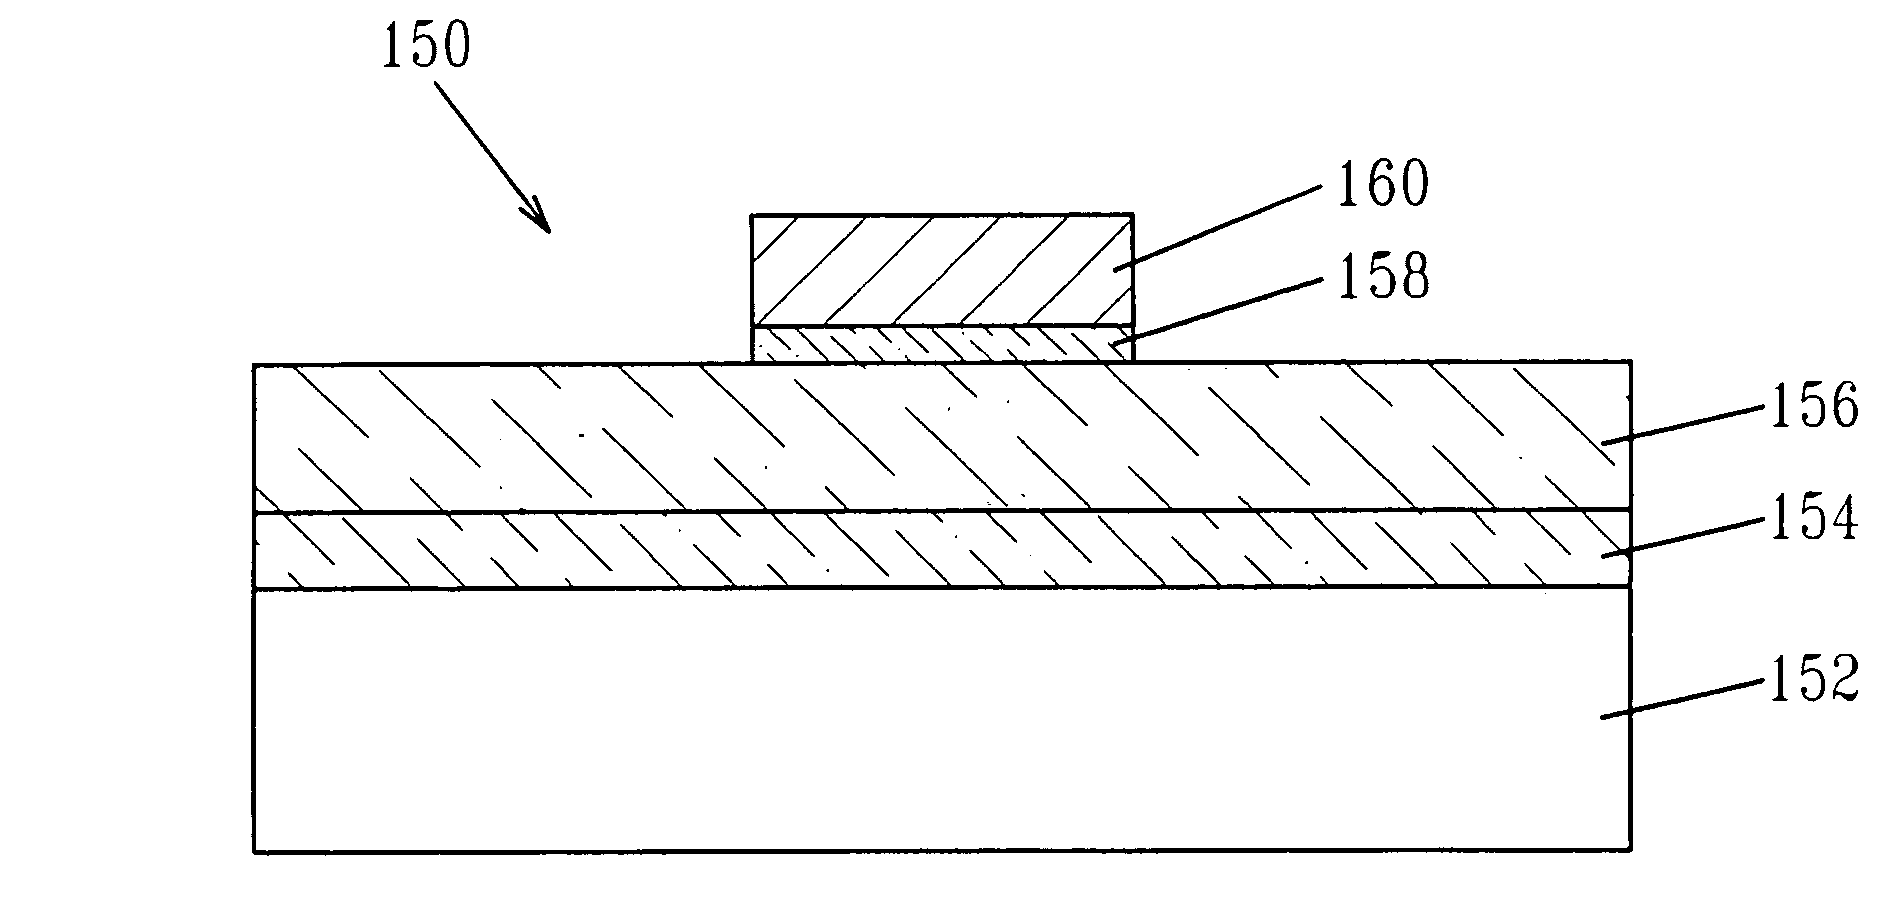 Deposition of hafnium oxide and/or zirconium oxide and fabrication of passivated electronic structures